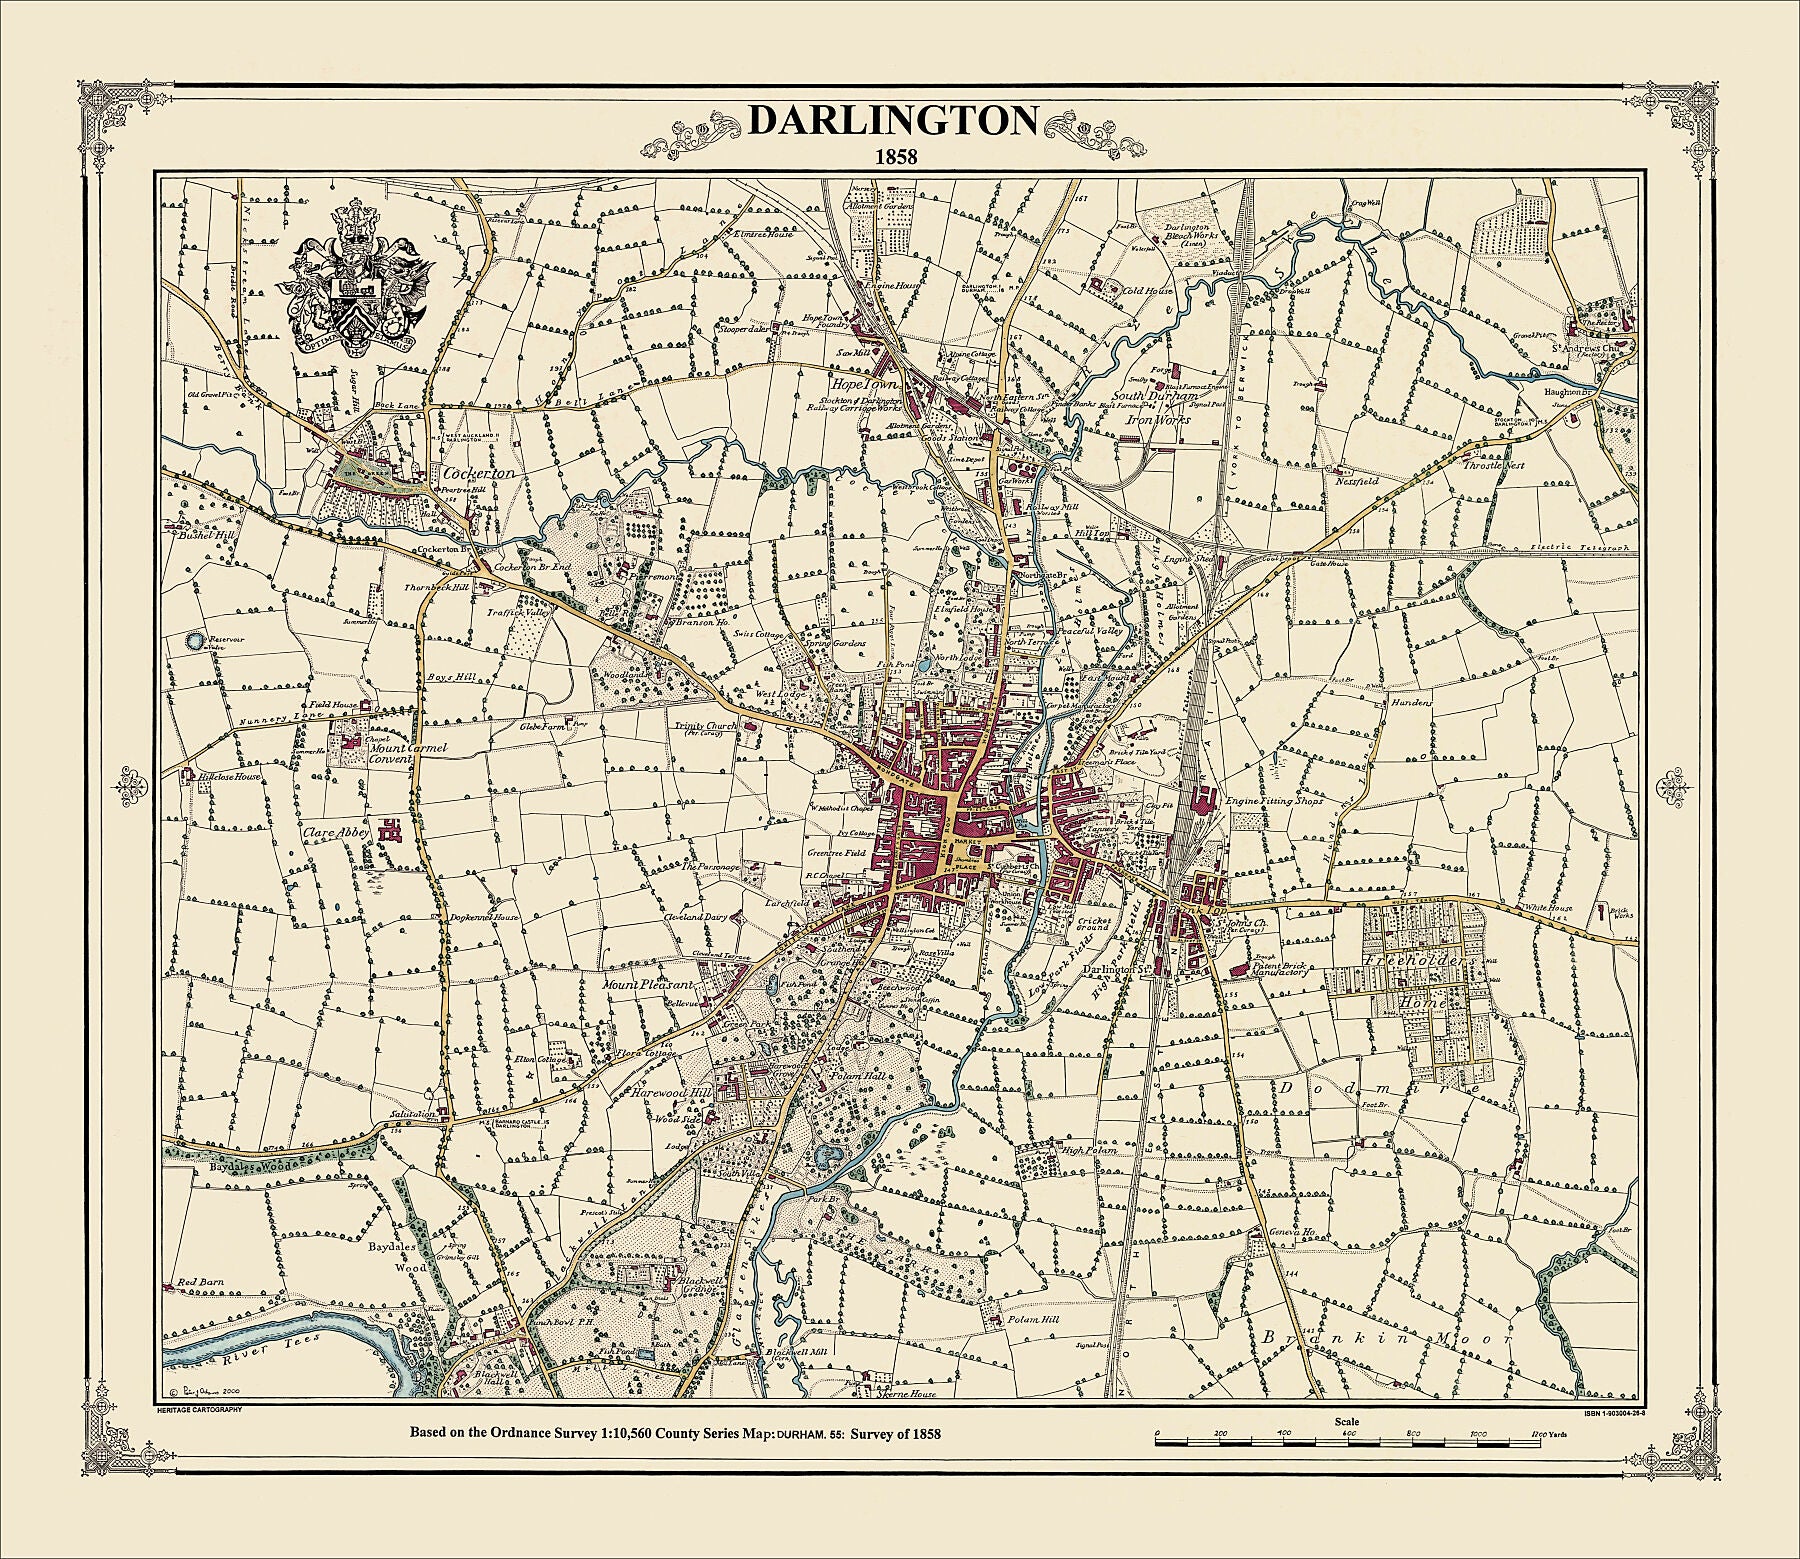 Coloured Victorian map of Darlington in 1858 by Peter J Adams of Heritage Cartography